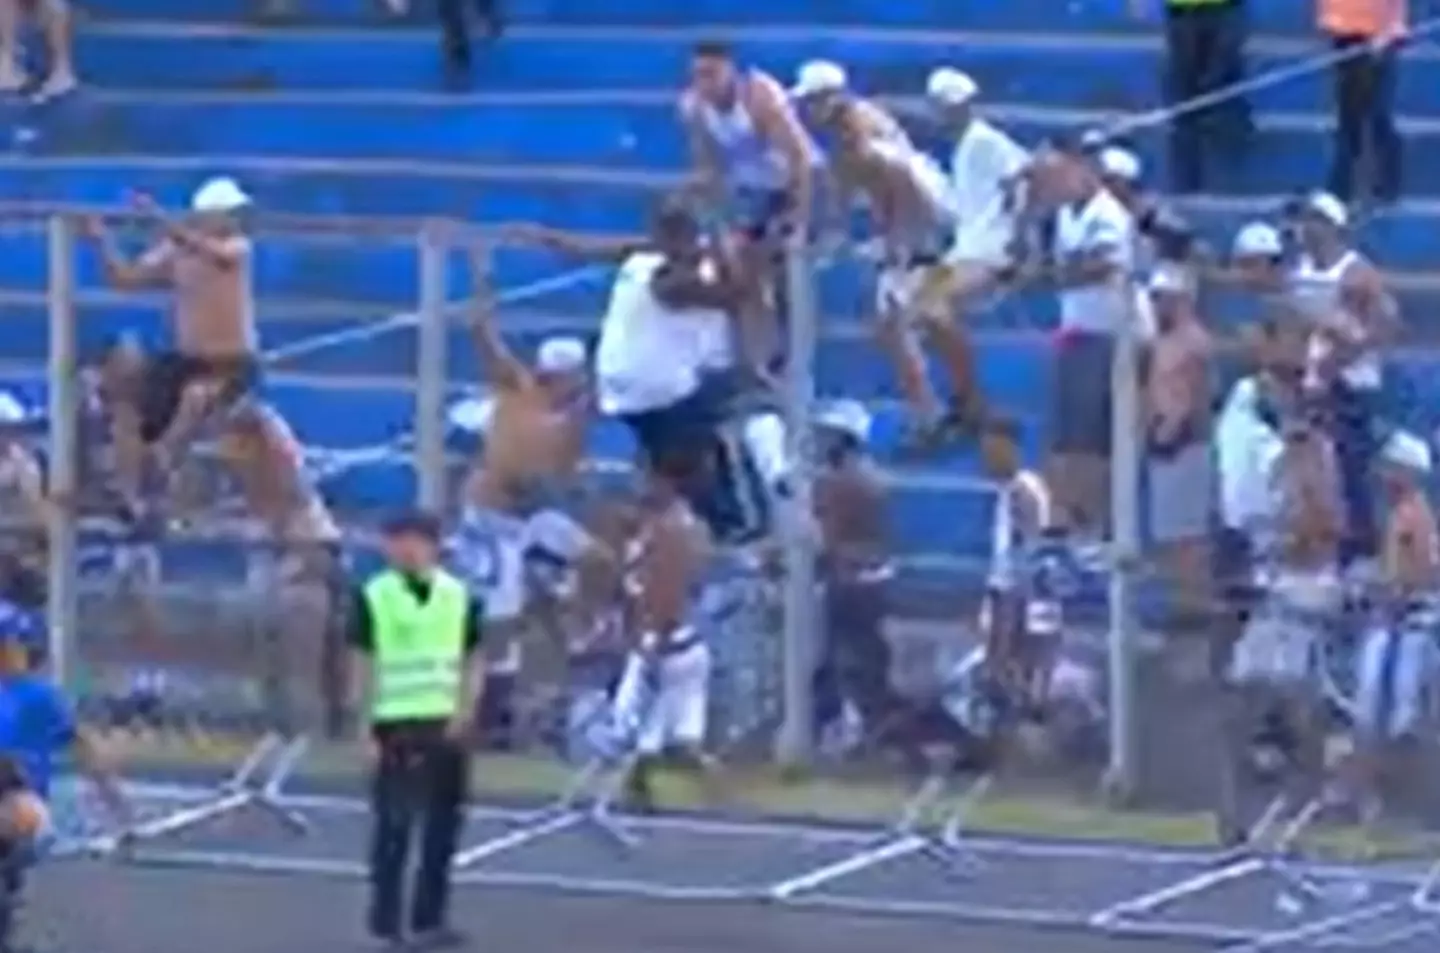 Football fans scaled fences to rush onto the pitch in Brazil. Credit:X/@geglobo